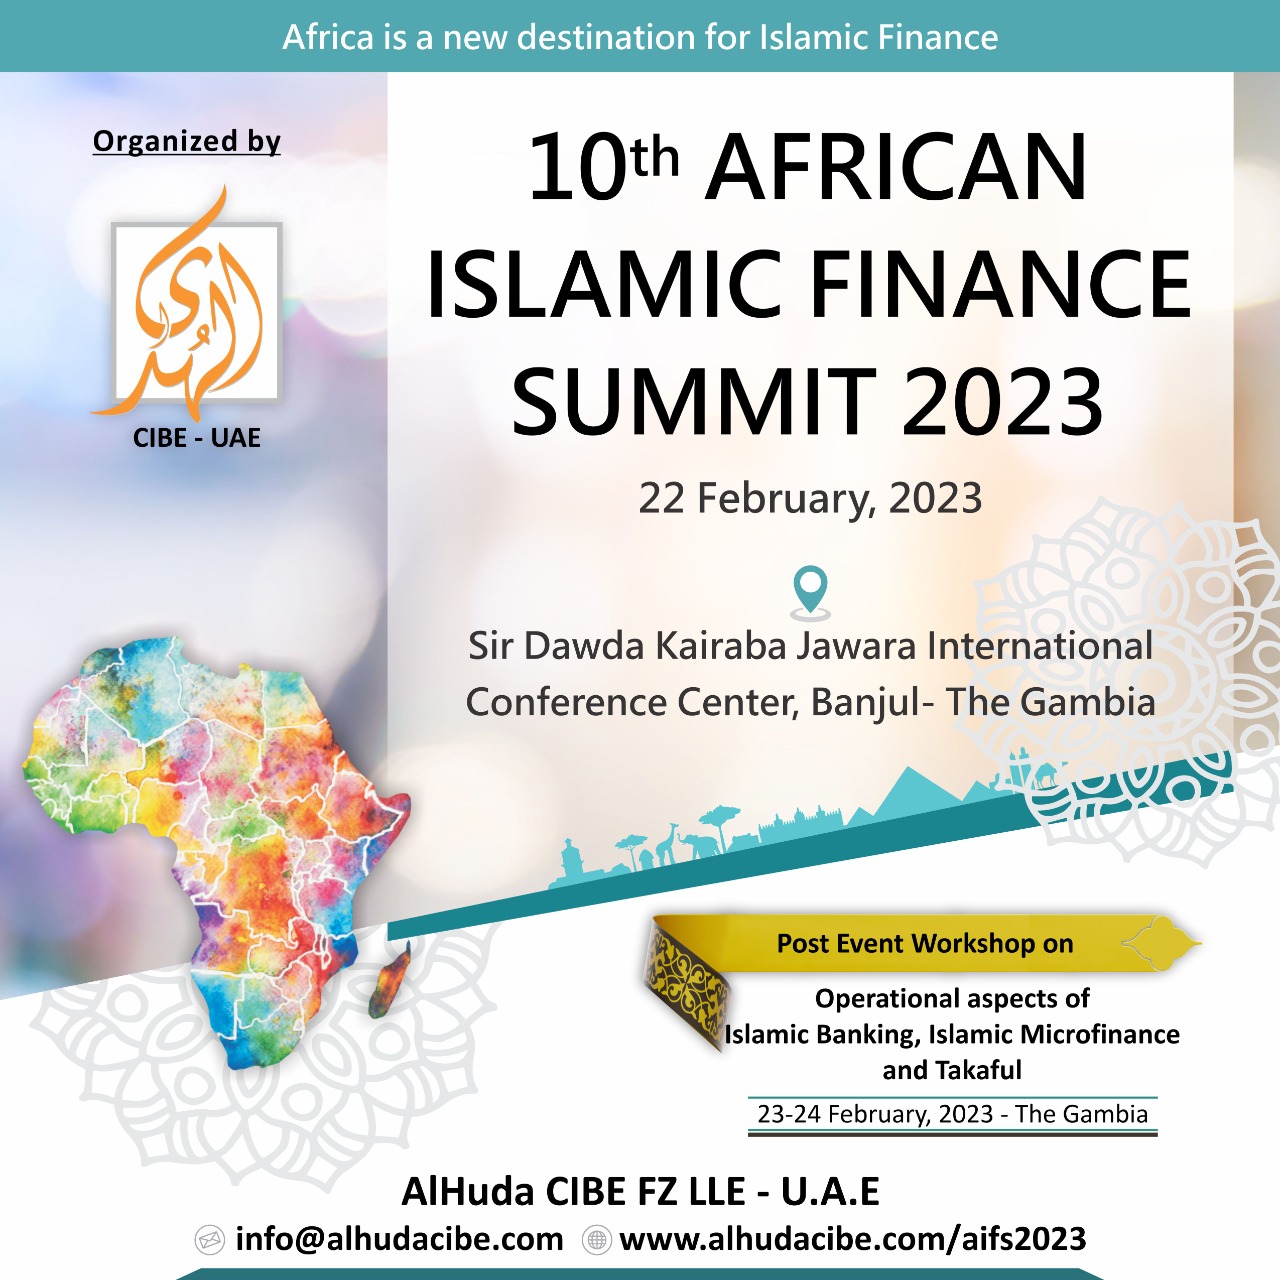 10th African Islamic Finance Summit will be Hosted in the Smiling Coast of West Africa, the Gambia